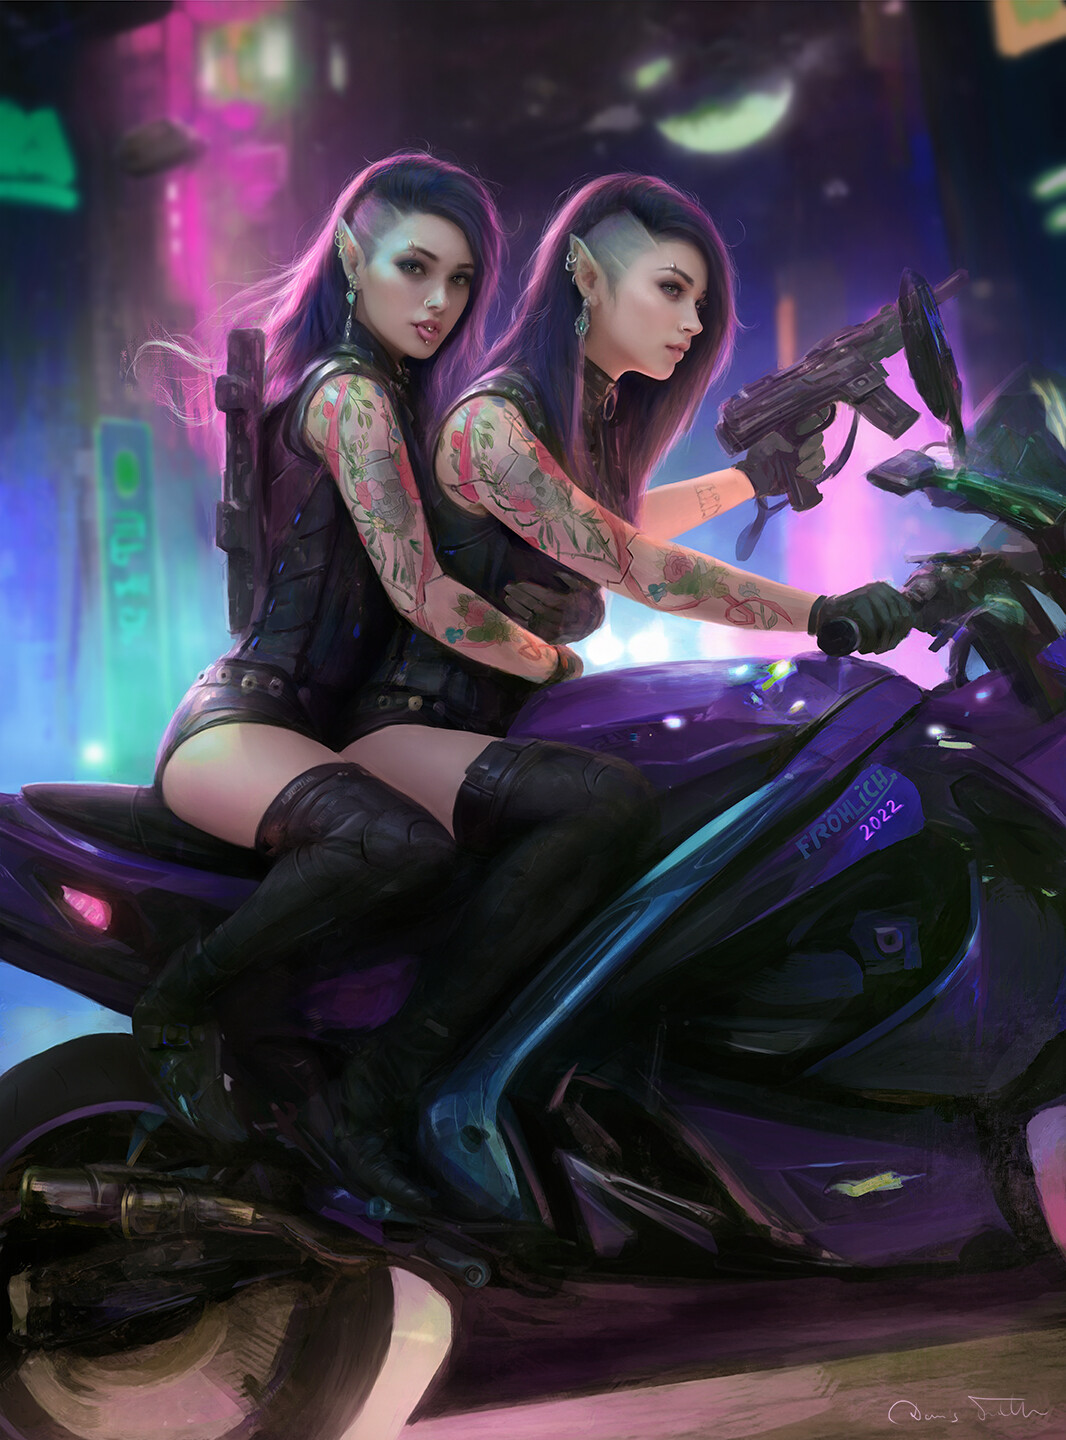 Dennis Frohlich Drawing Two Women Cyberpunk Pointy Ears Tattoo Motorcycle Vehicle Portrait Display G 1066x1440